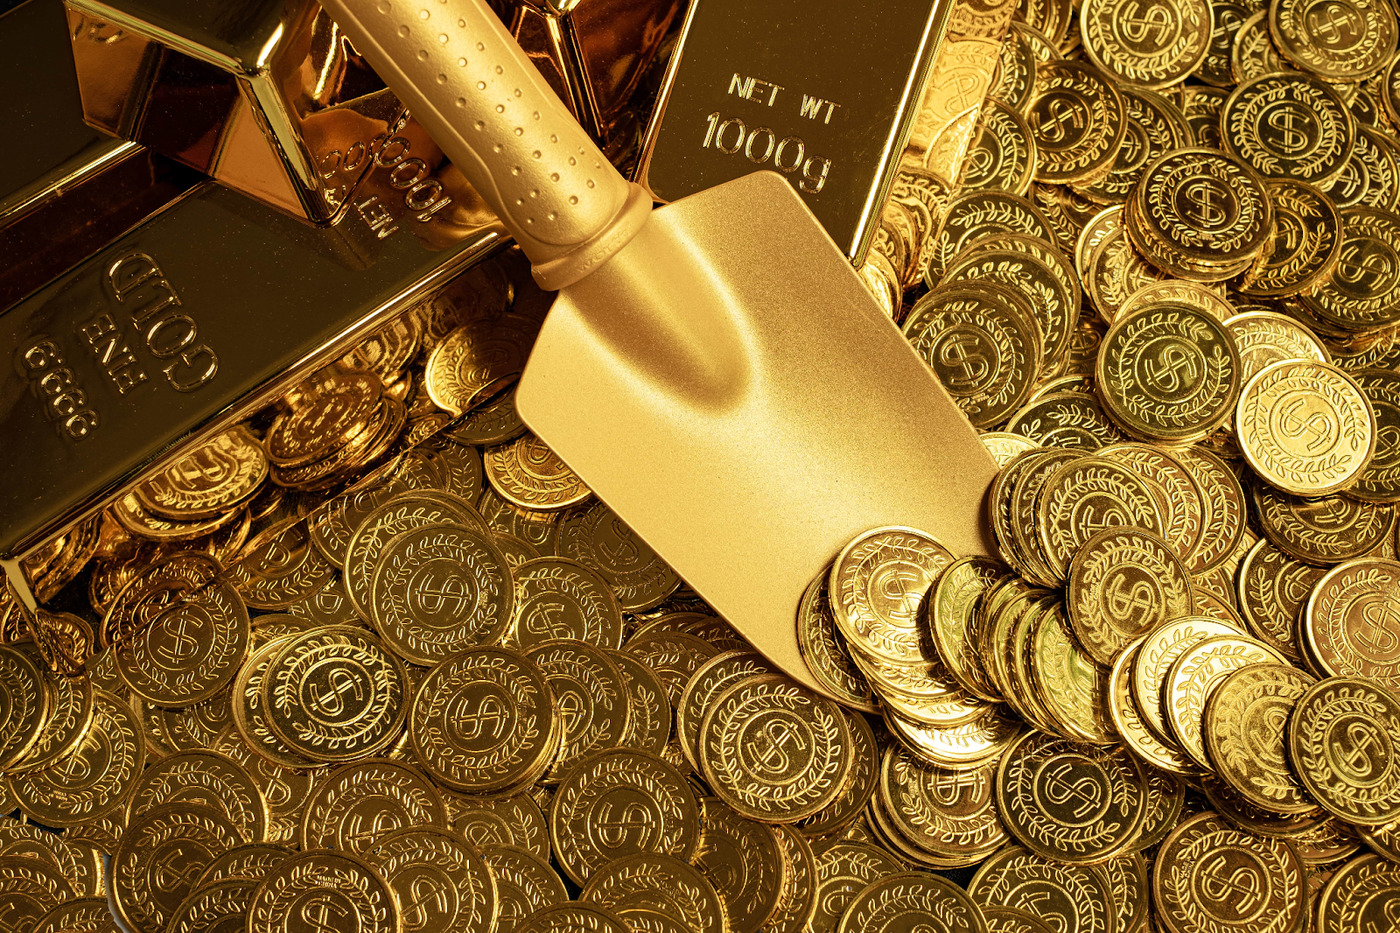 Odkup Zlata is a premier gold buying service based in Slovenia that offers transparent and fair evaluations for gold items.